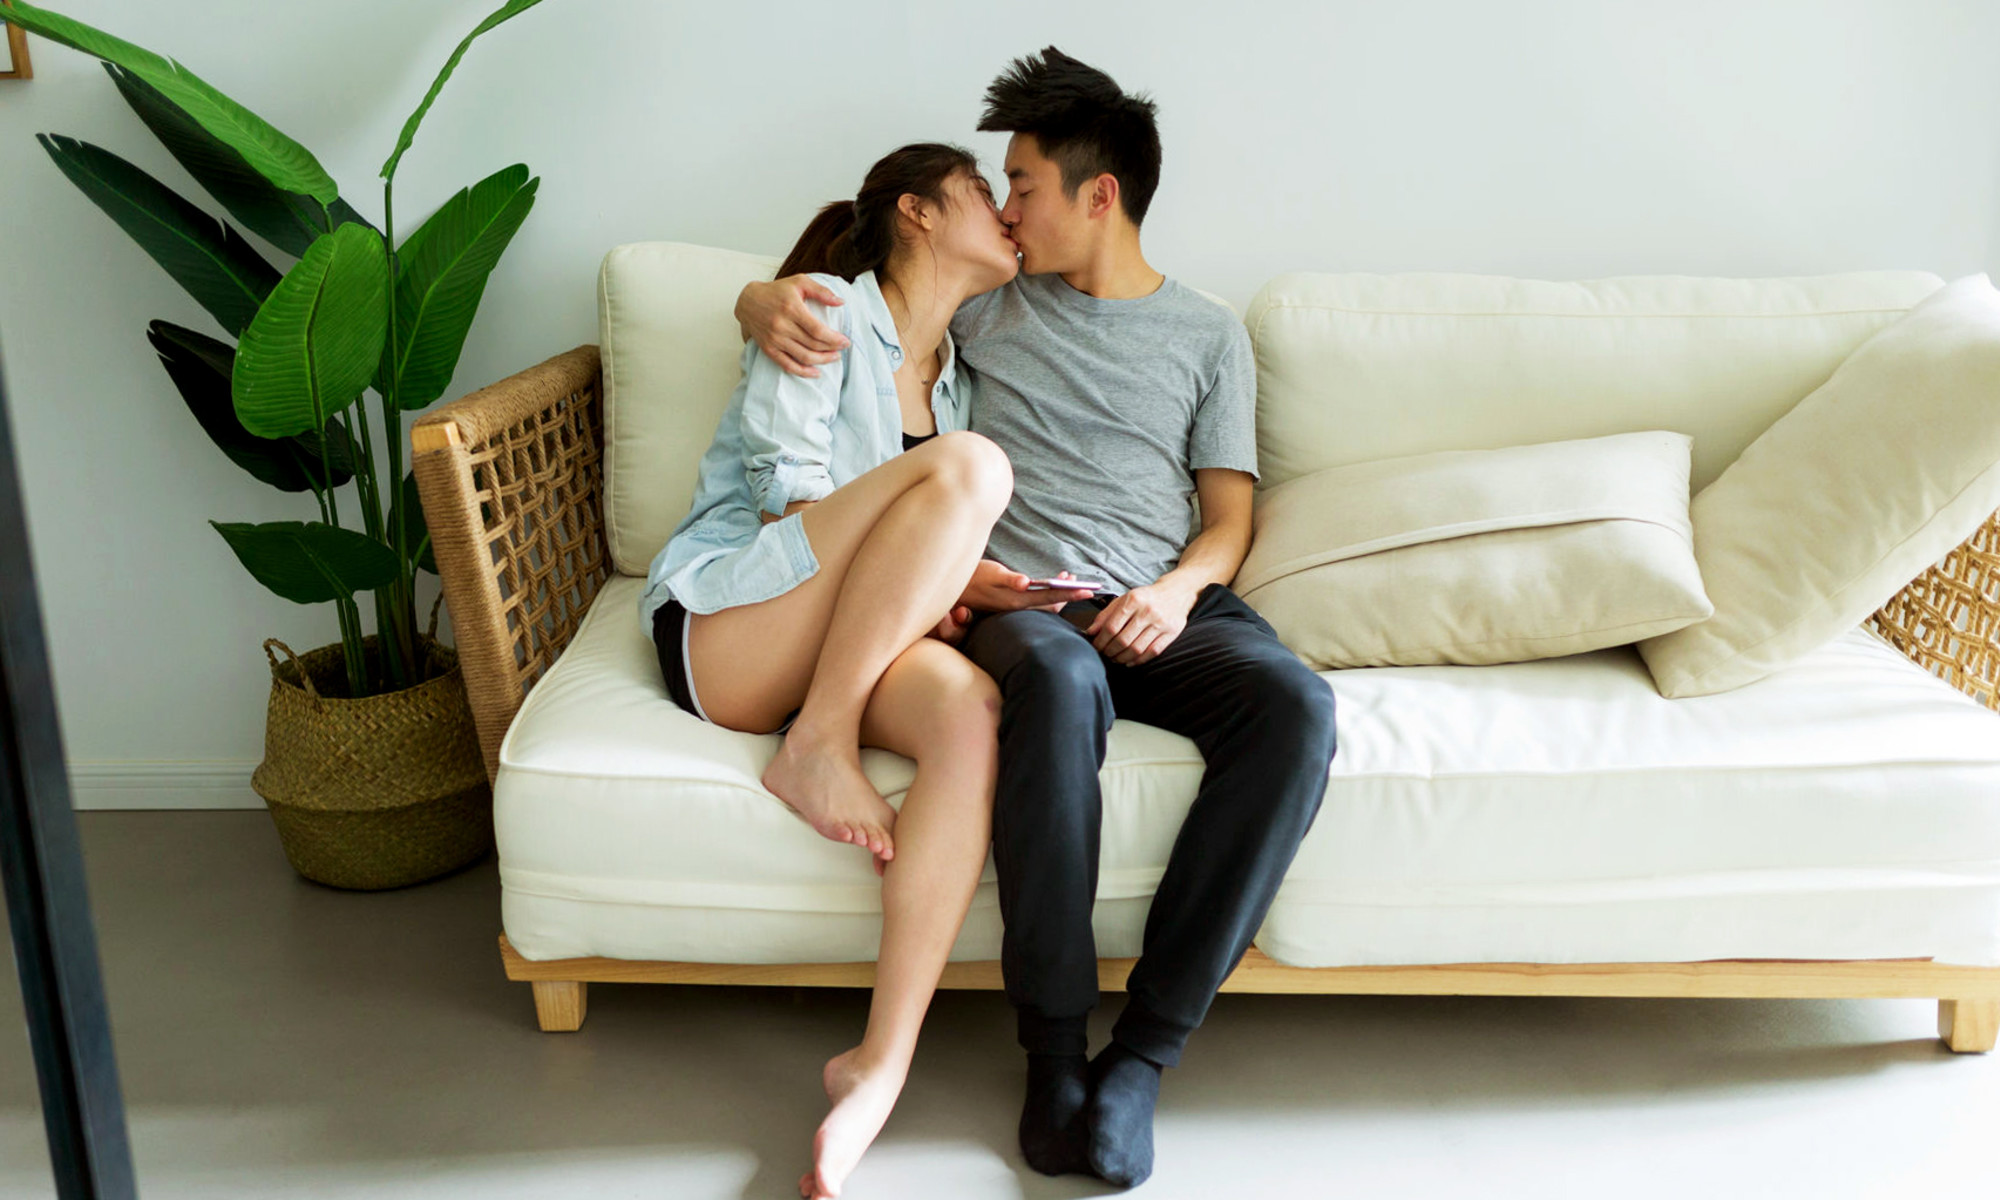 14 Scientific Benefits Of Kissing and Why Its Good For You mindbodygreen image